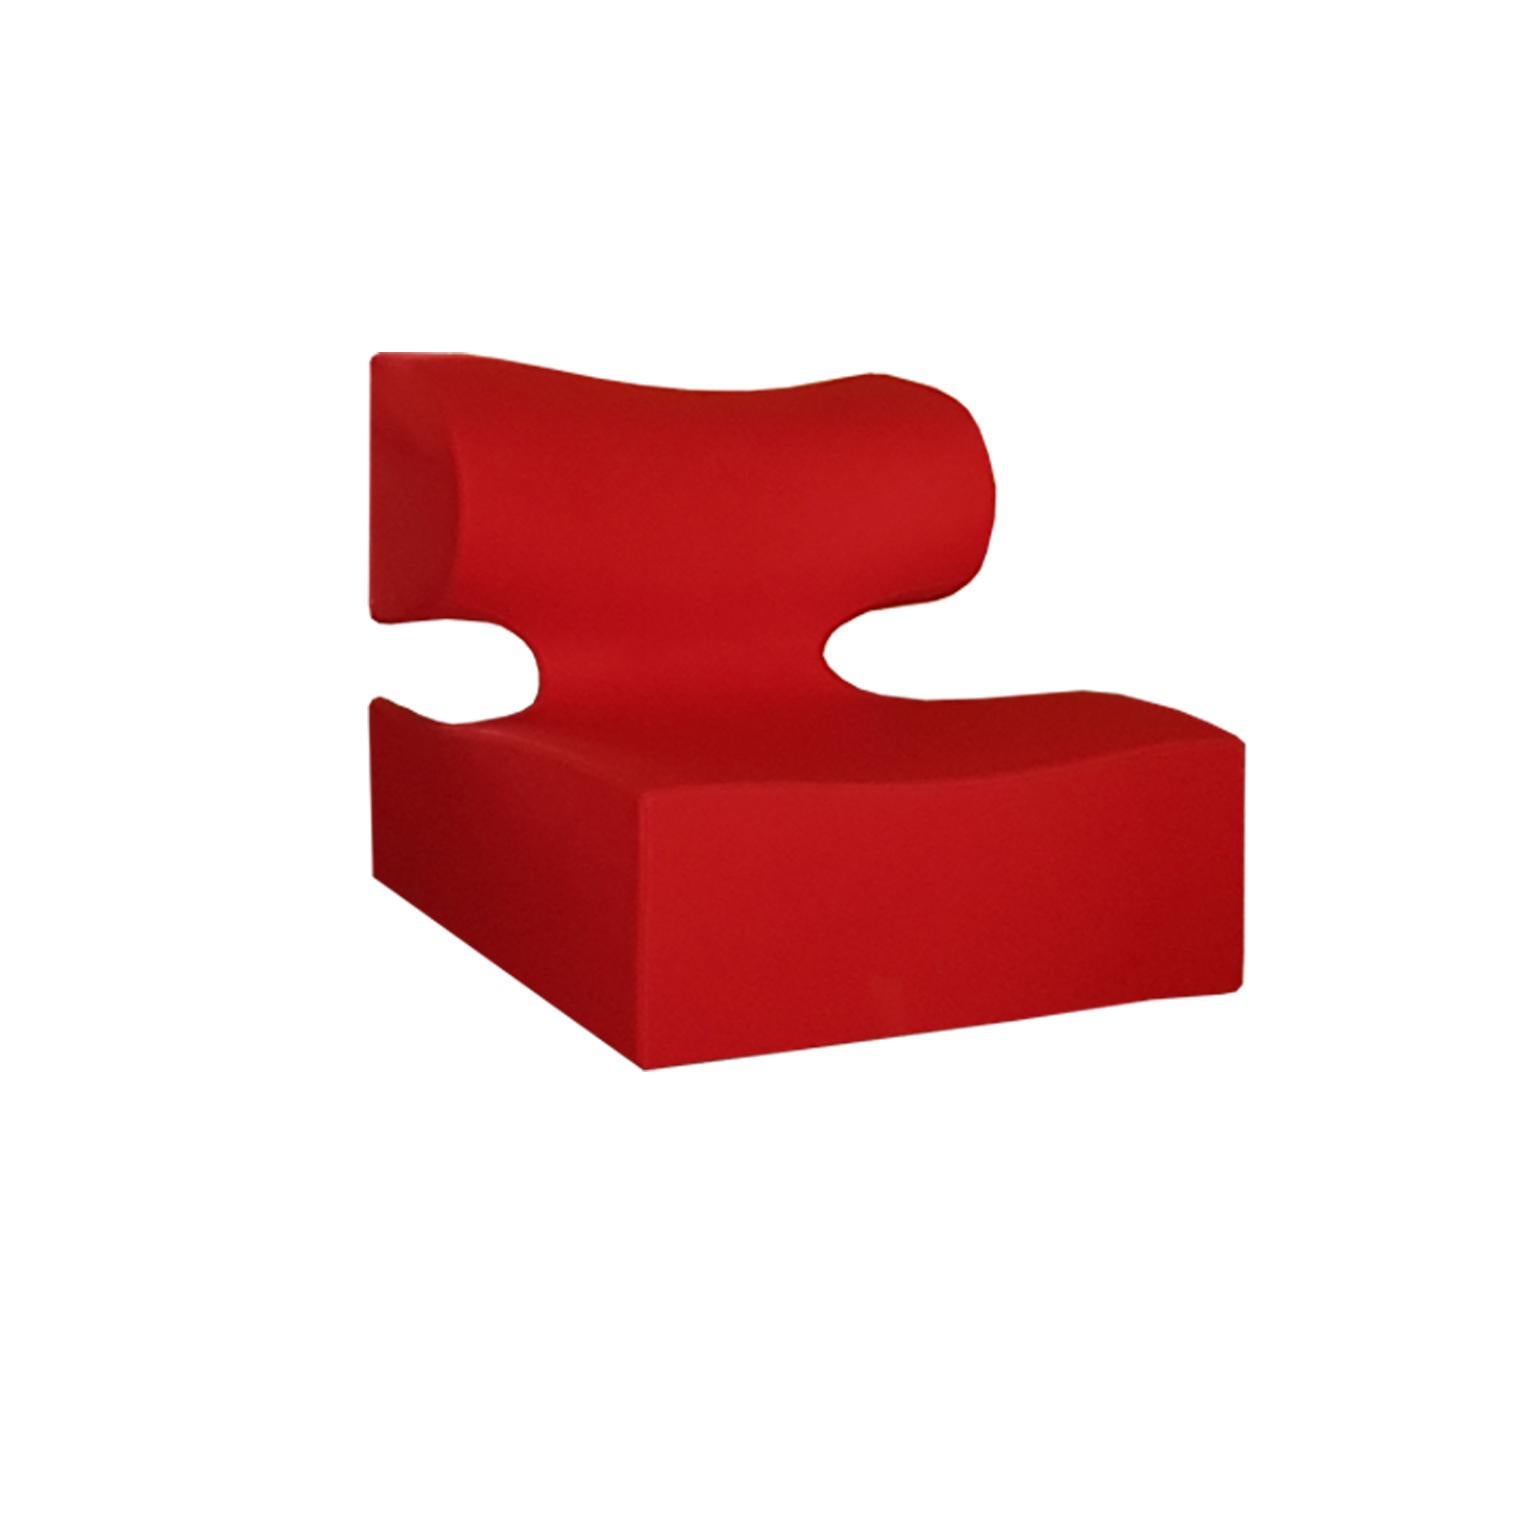 Contemporary Italian Moroso Modular Sofa with Red Wool Upholstery by Ron Arad For Sale 7